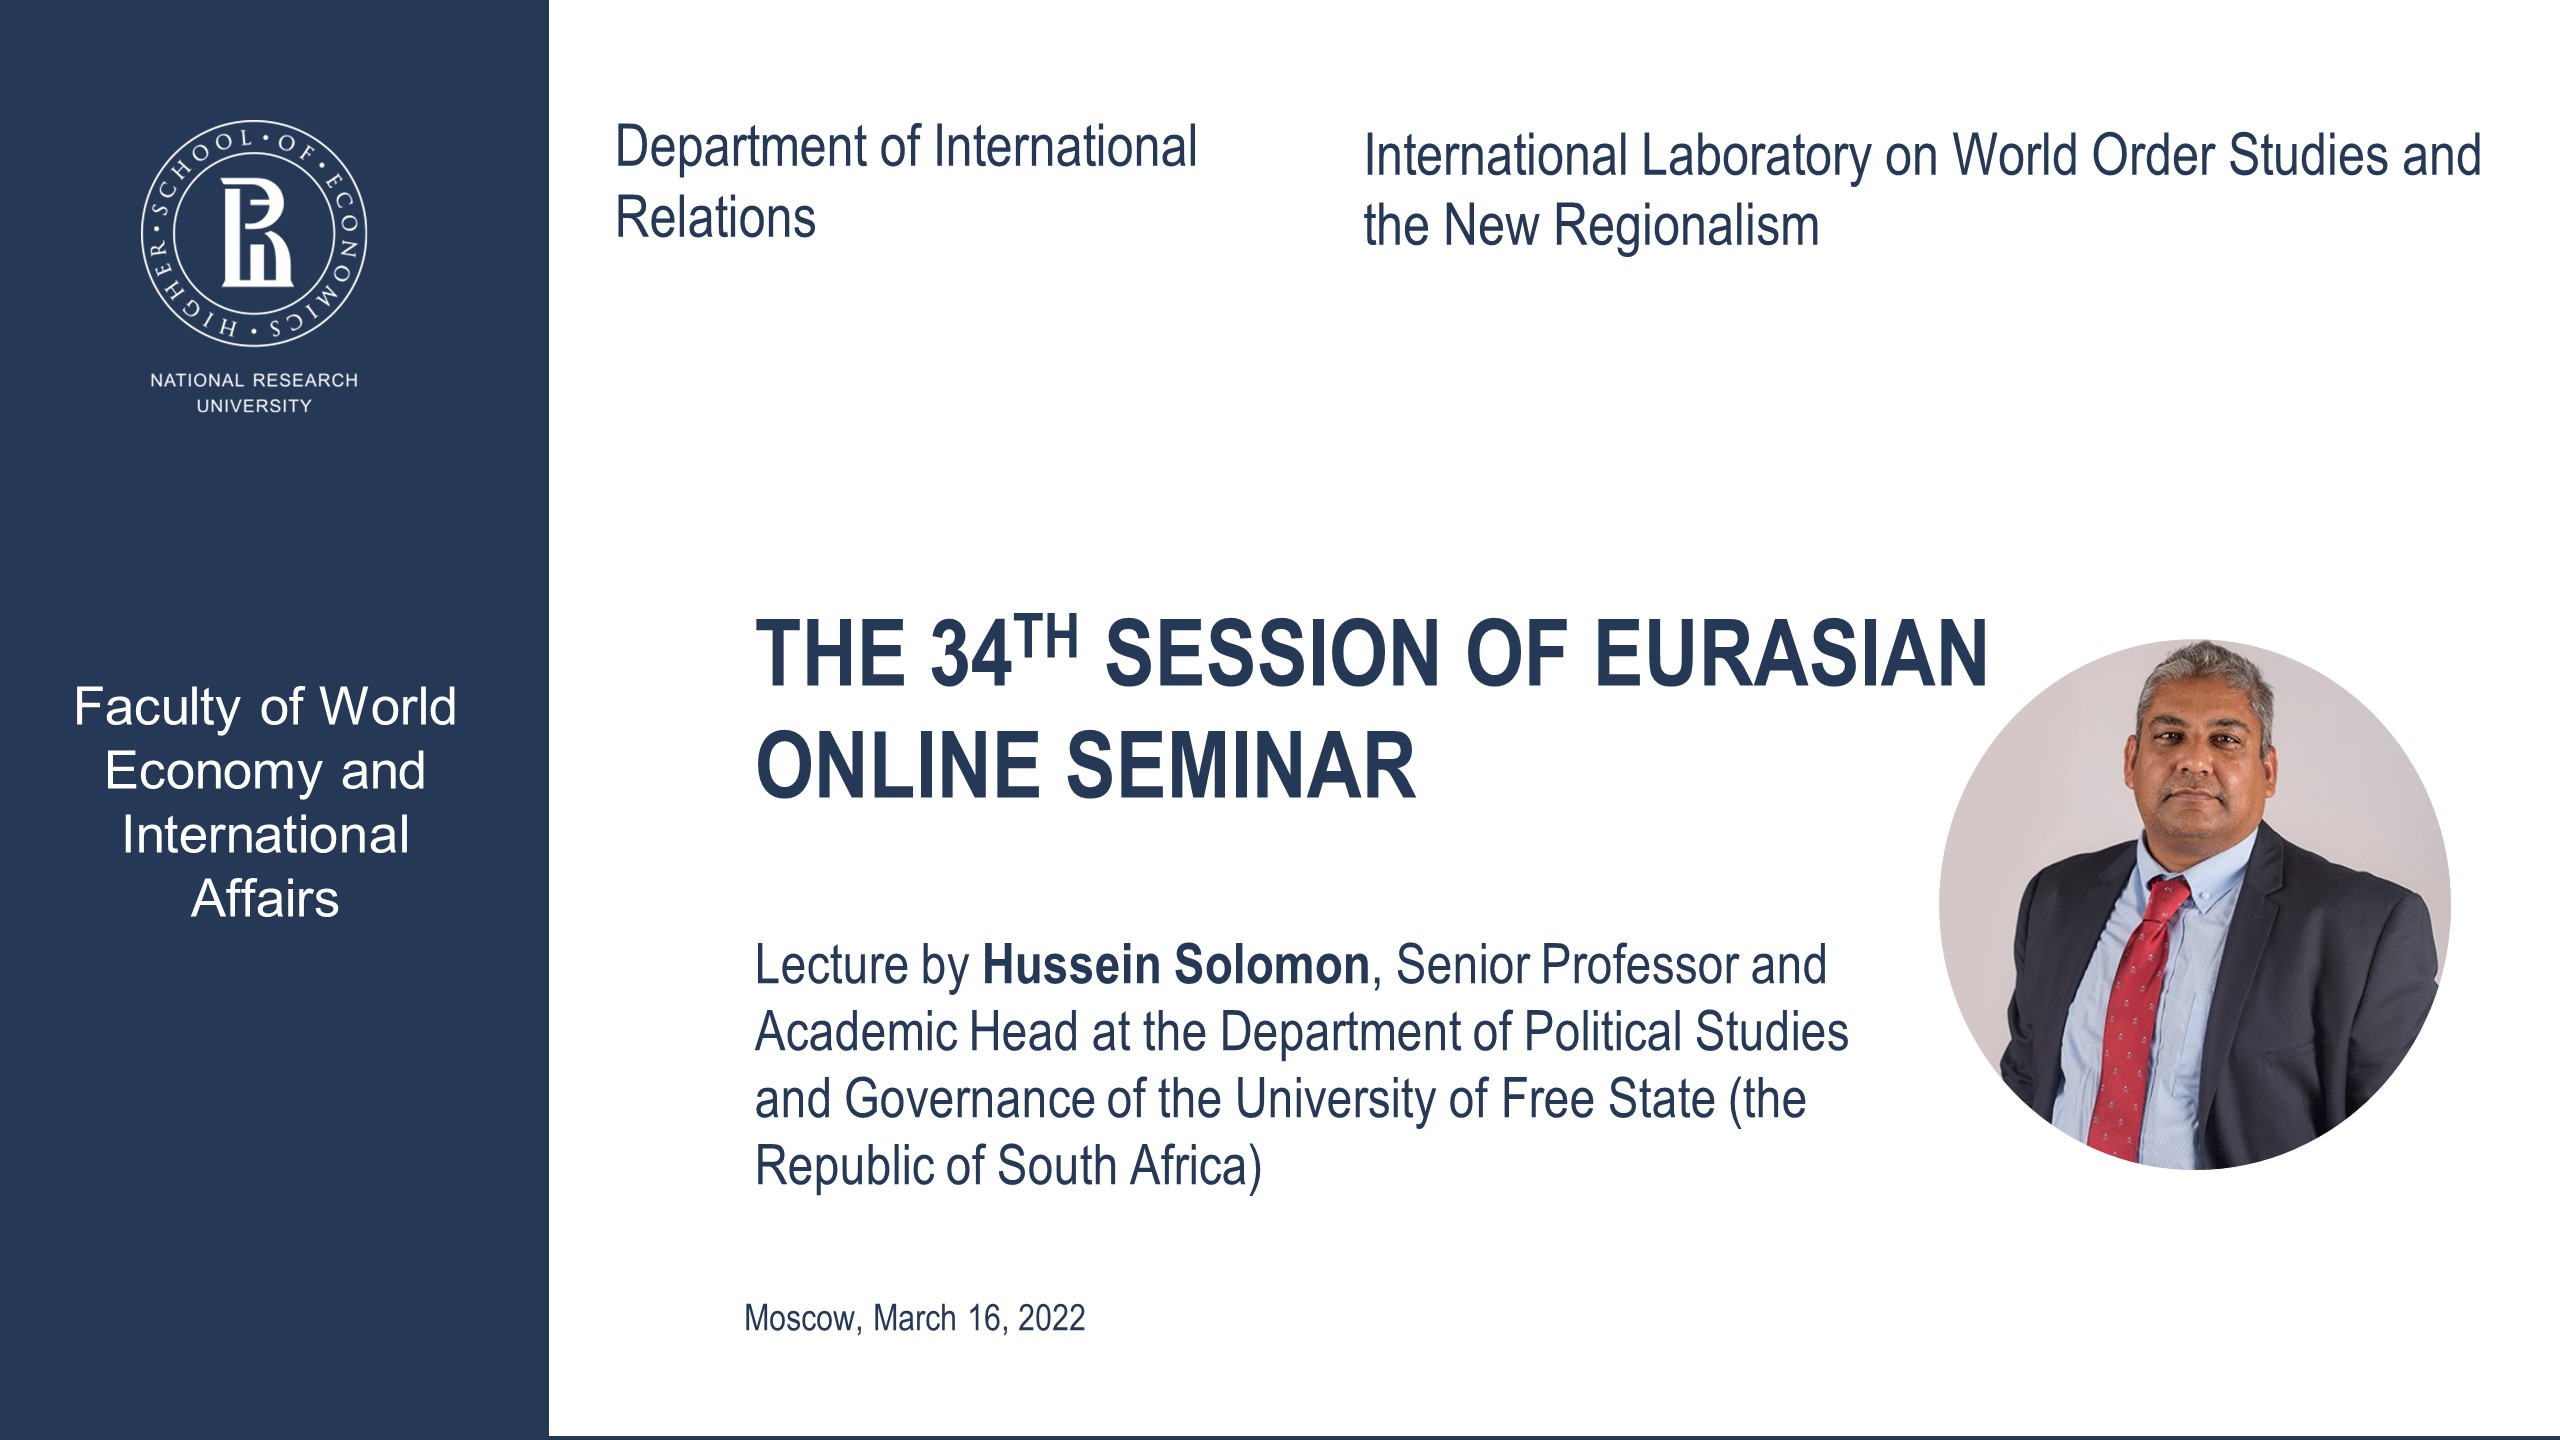 The 34th Session of Eurasian Online Seminar with Hussein Solomon